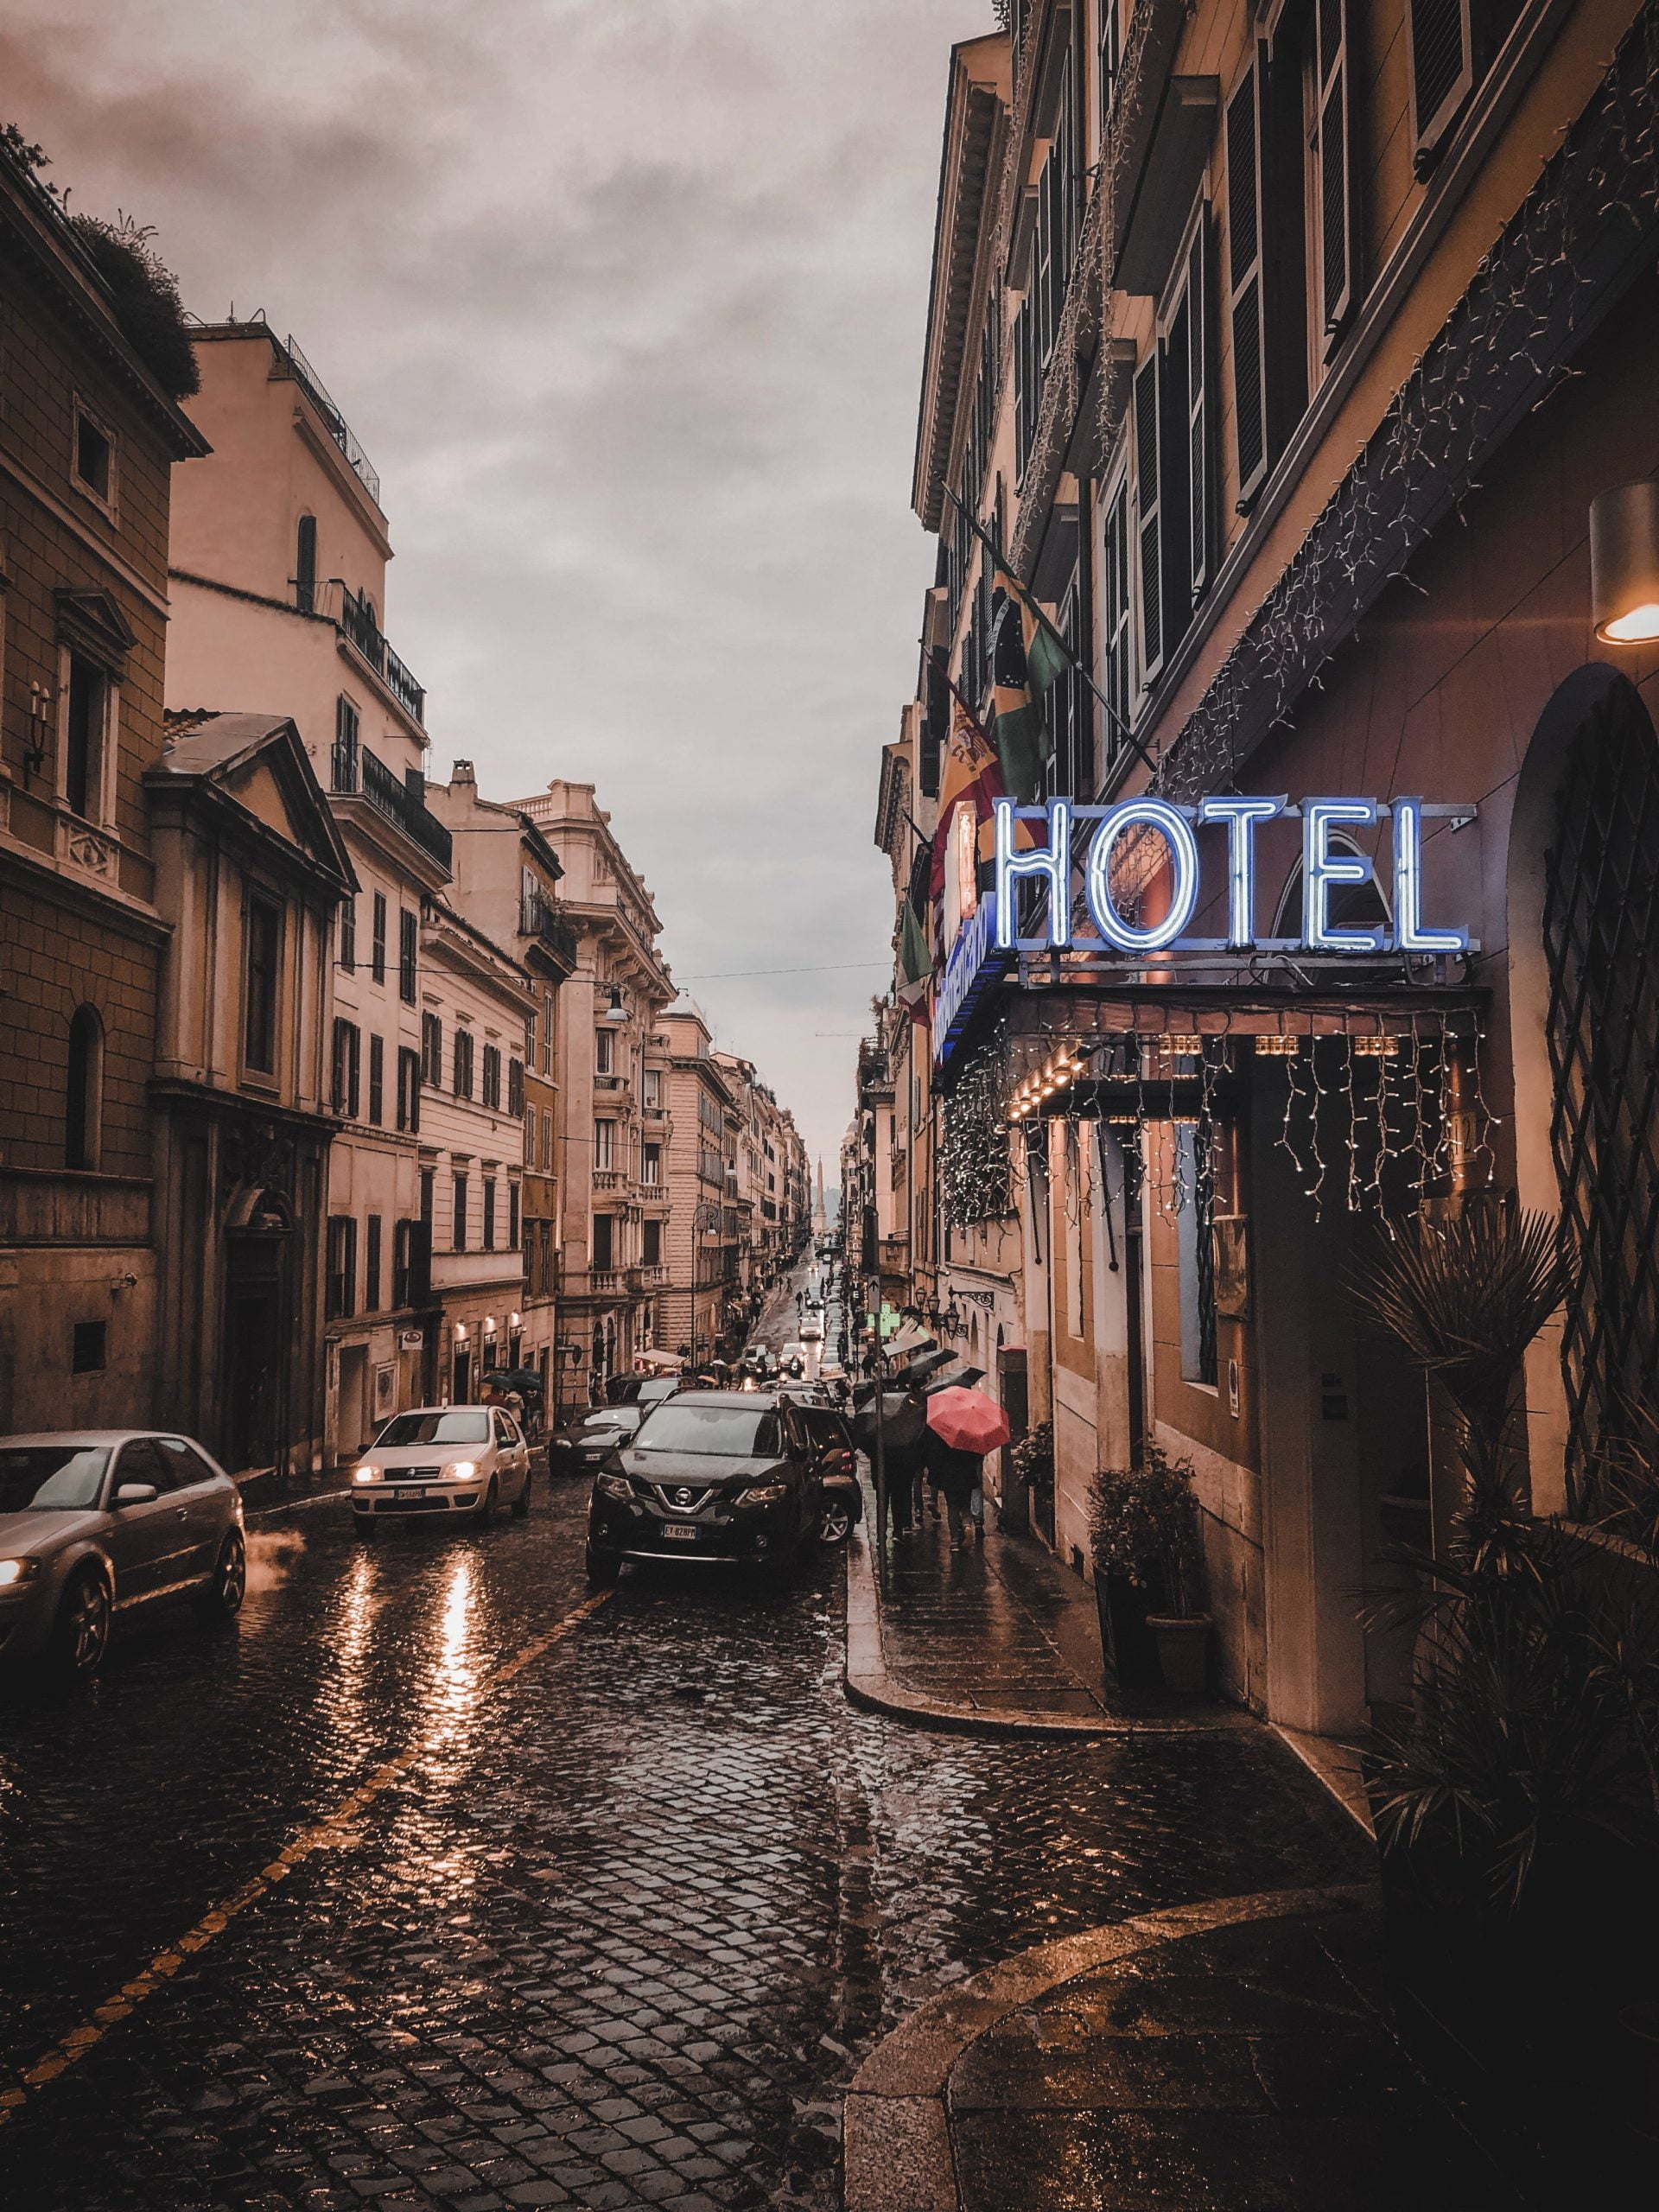 Looking To Sell Your Hotel? Here’s our Top 10 Tips To Get It Exit Ready